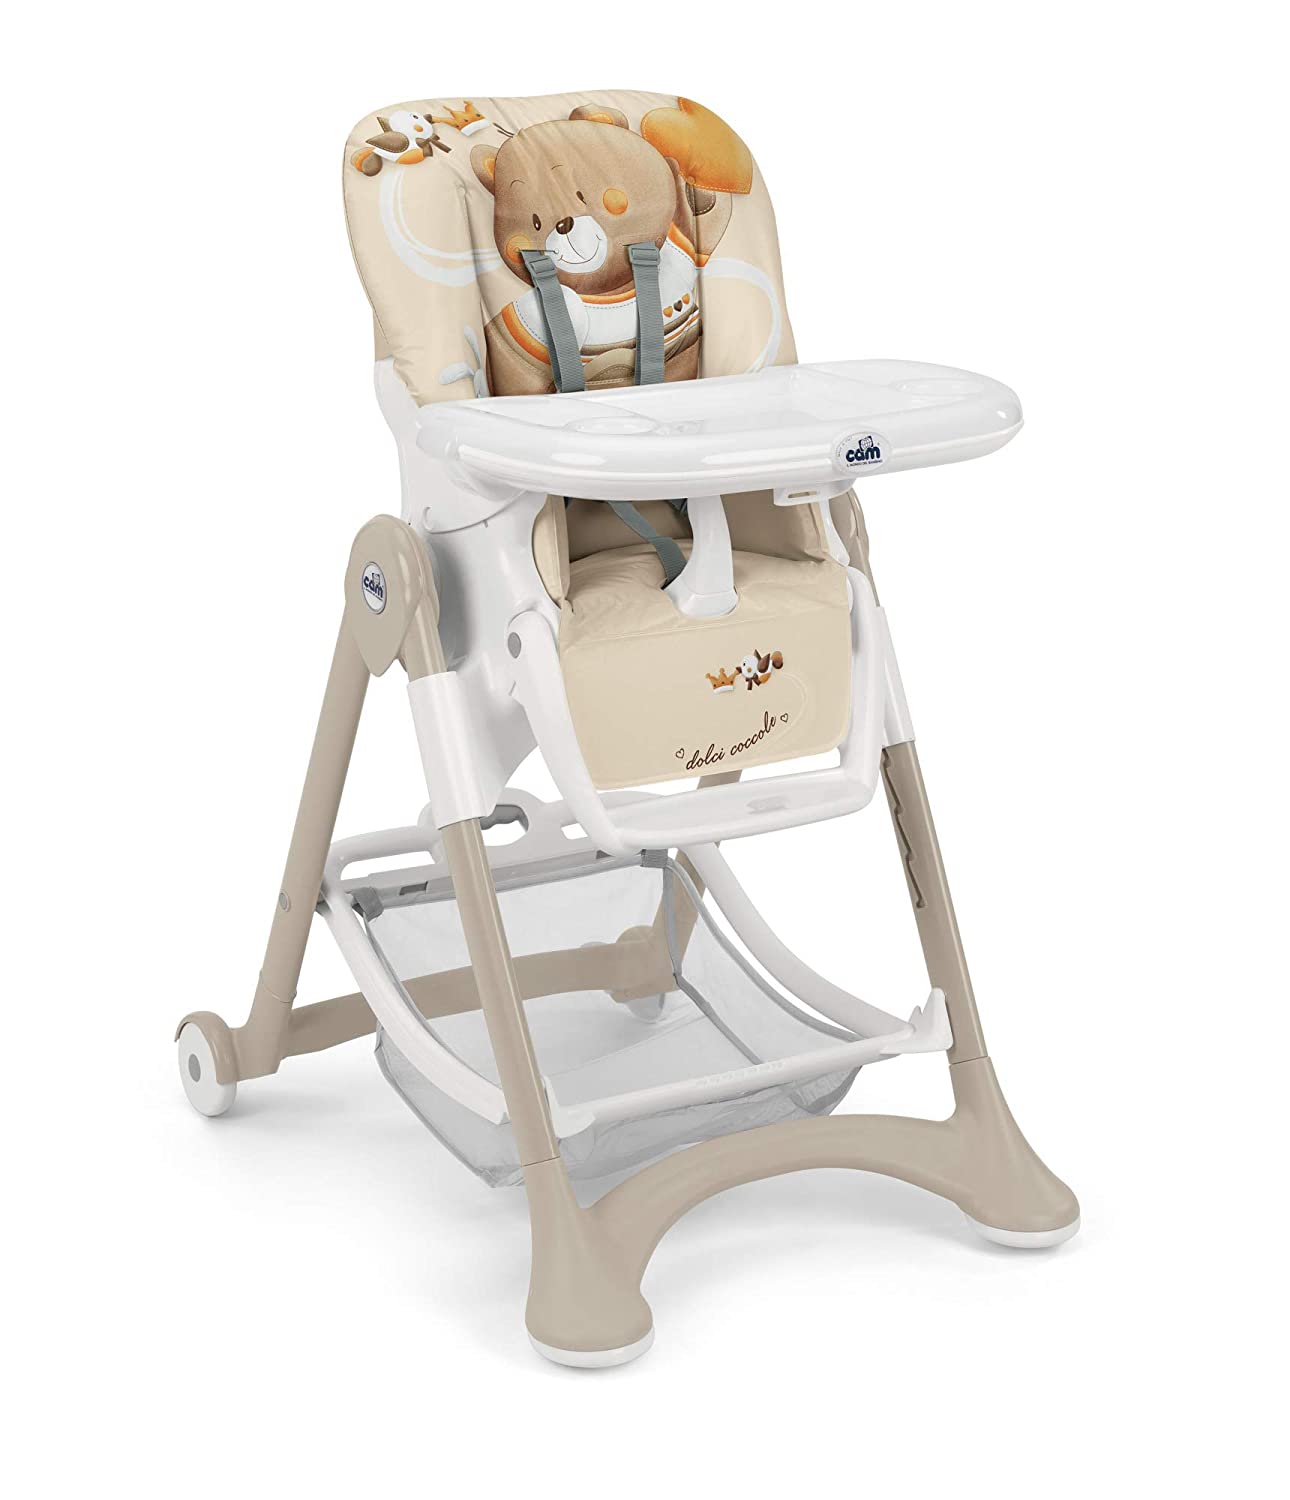 CAM CAMPIONE High Chair - Baby Chair Grows with Your Children\'s High Seat - Includes Tray - Washable Cushion - Soft Padding & Adjustable Strap - Children\'s High Seat - Made in Italy (Bear)